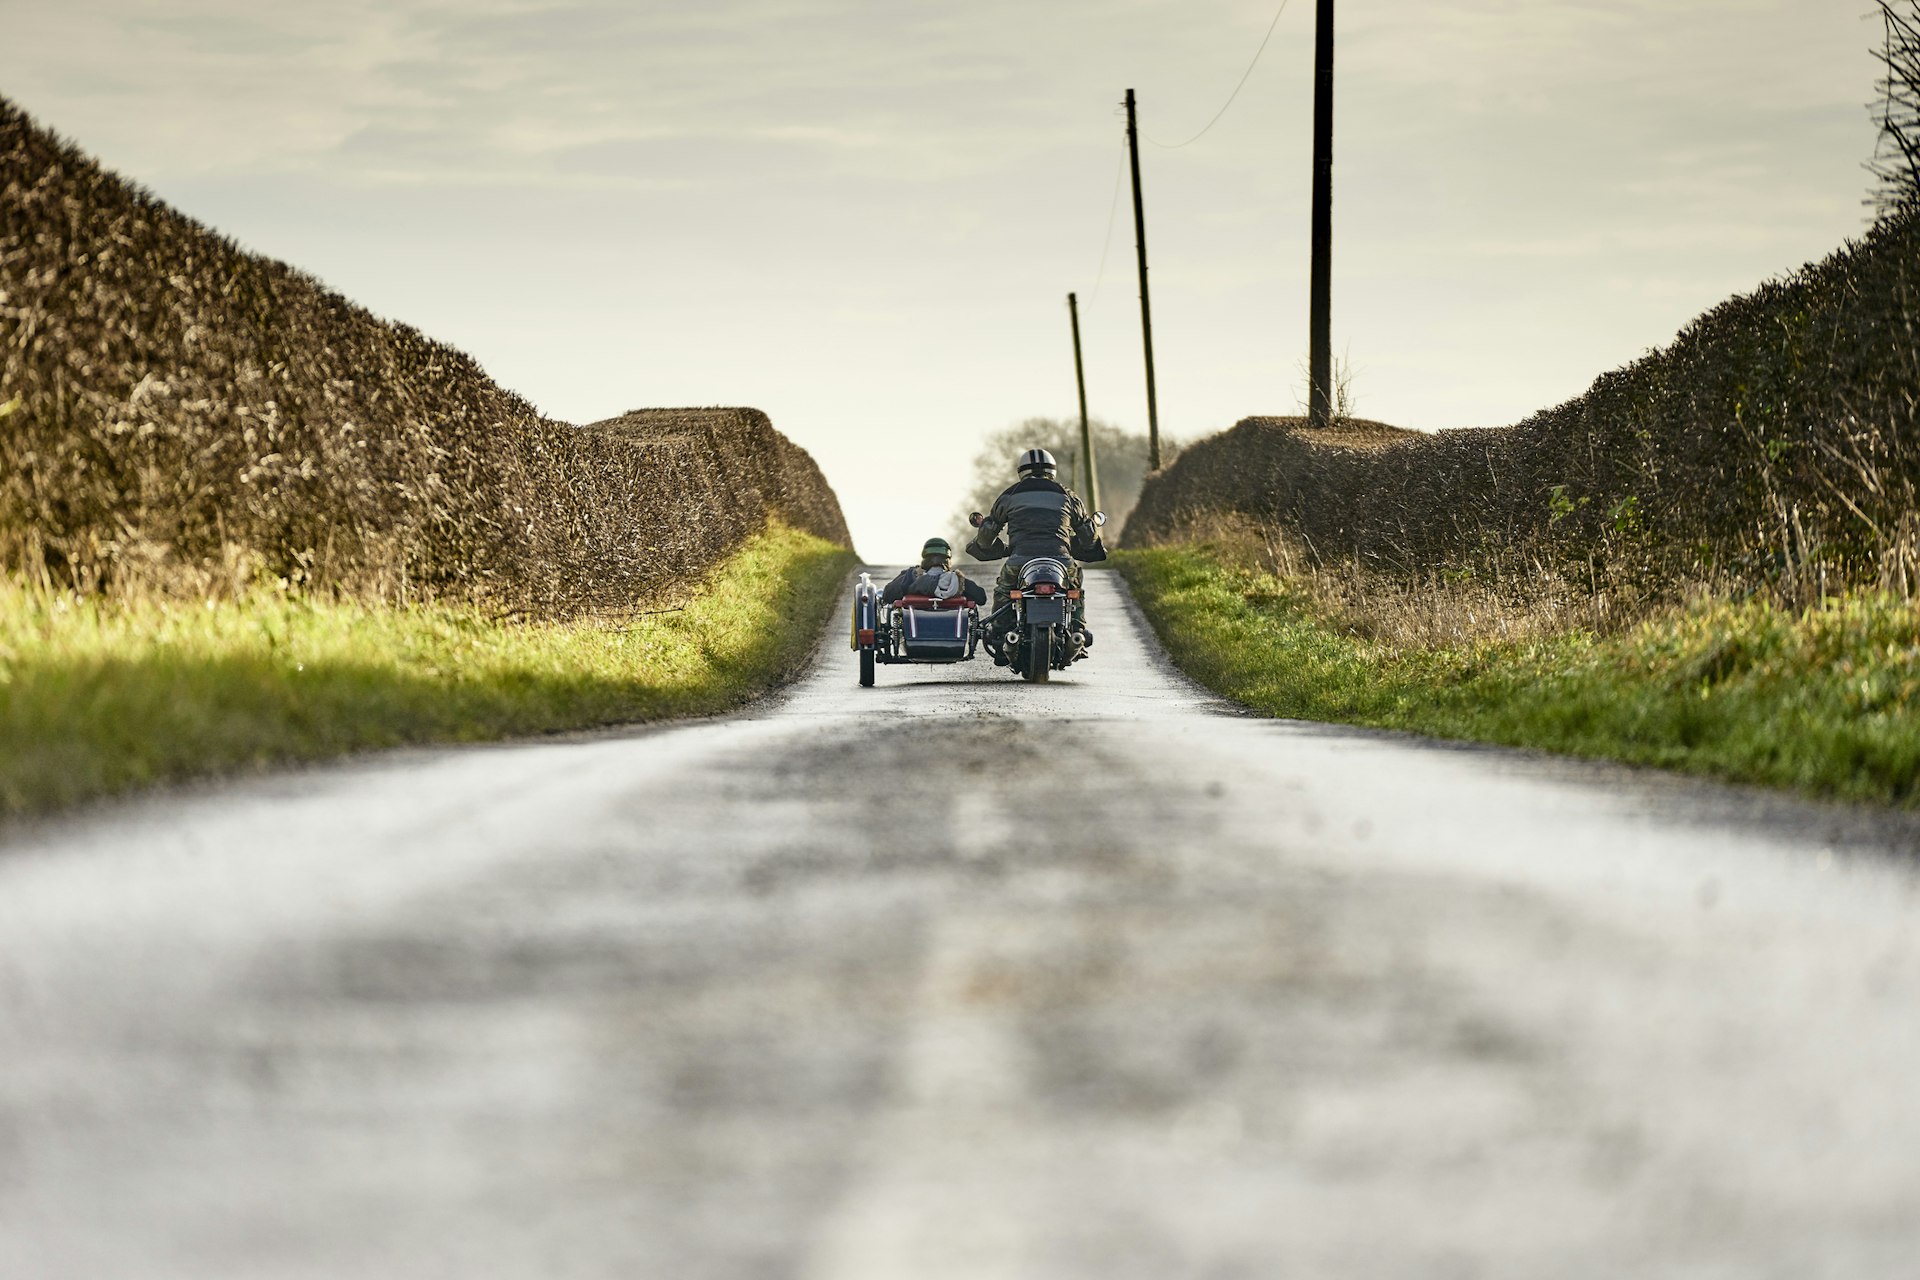 Rear view of senior man and grandson riding motorcycle and sidecar on rural road